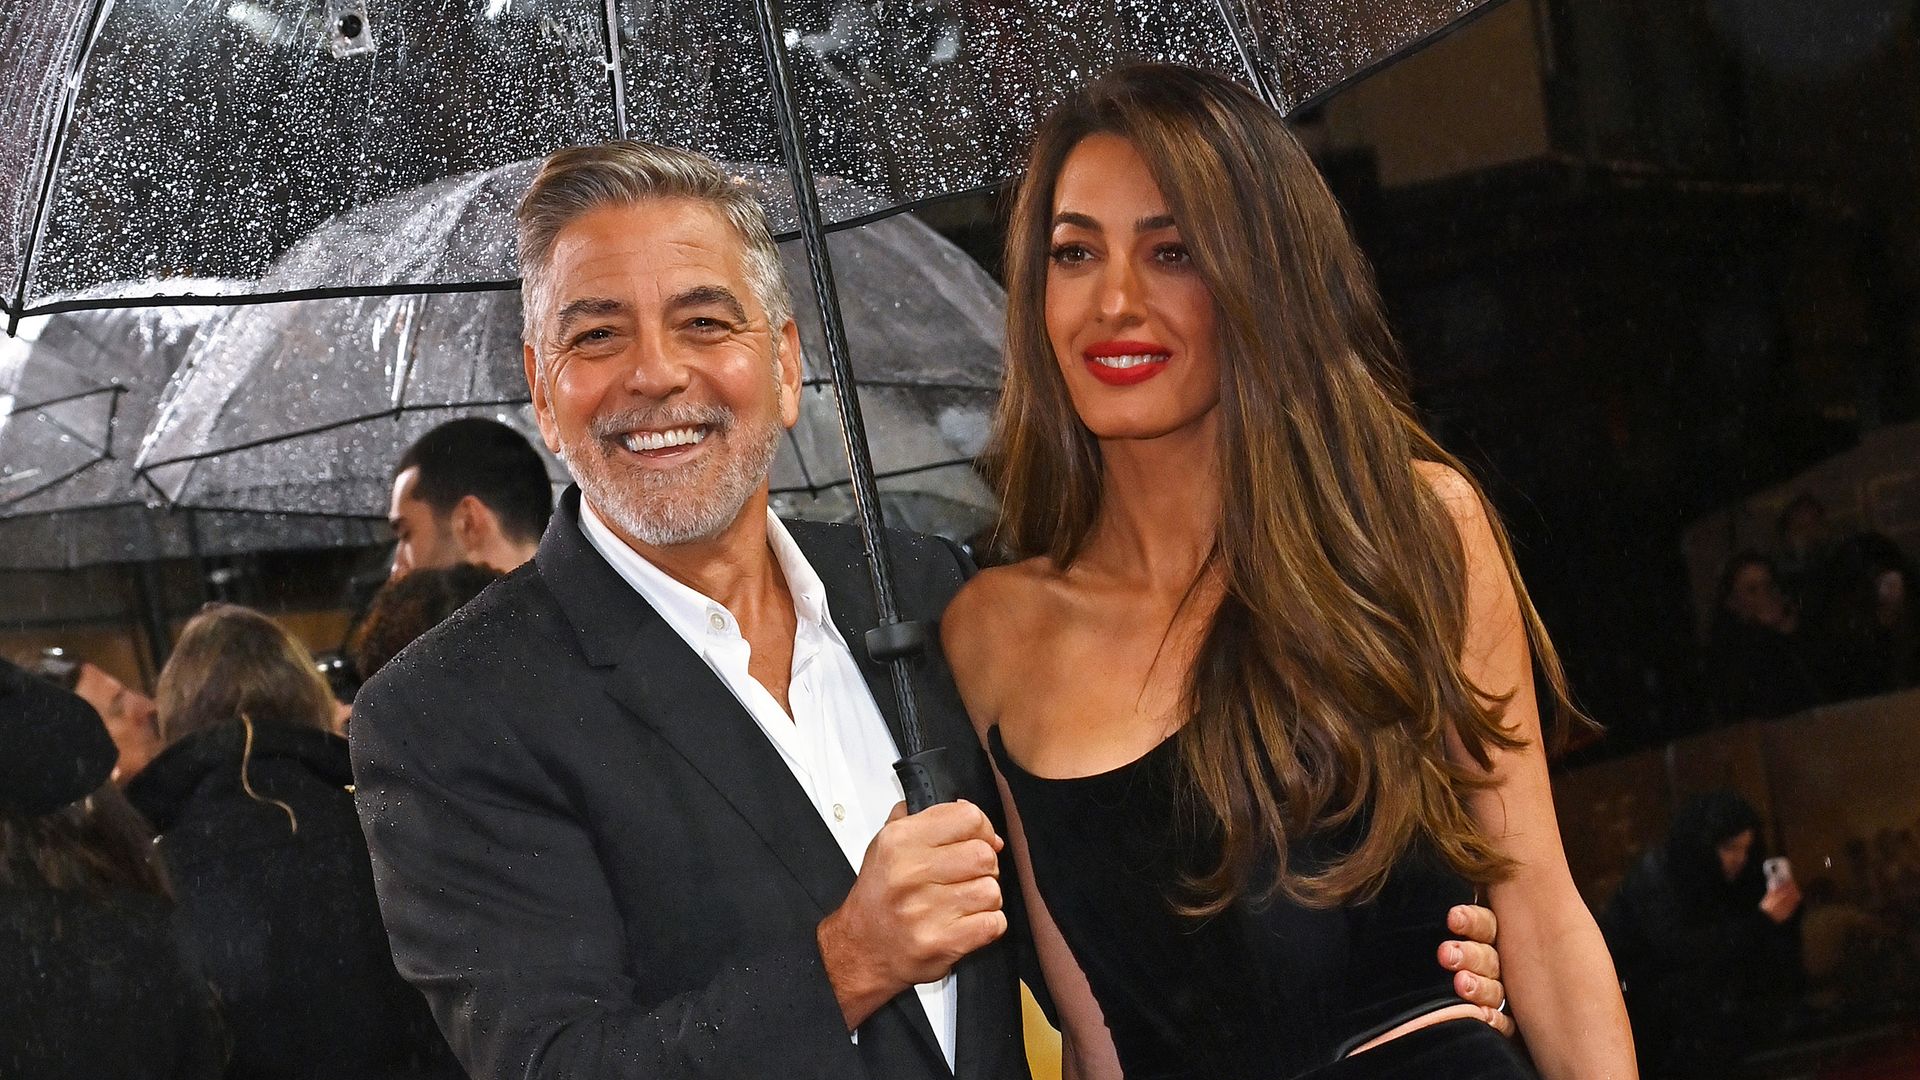 George Clooney and Amal Clooney attend a special screening of "The Boys In The Boat" at The Curzon Mayfair on December 3, 2023 in London, England